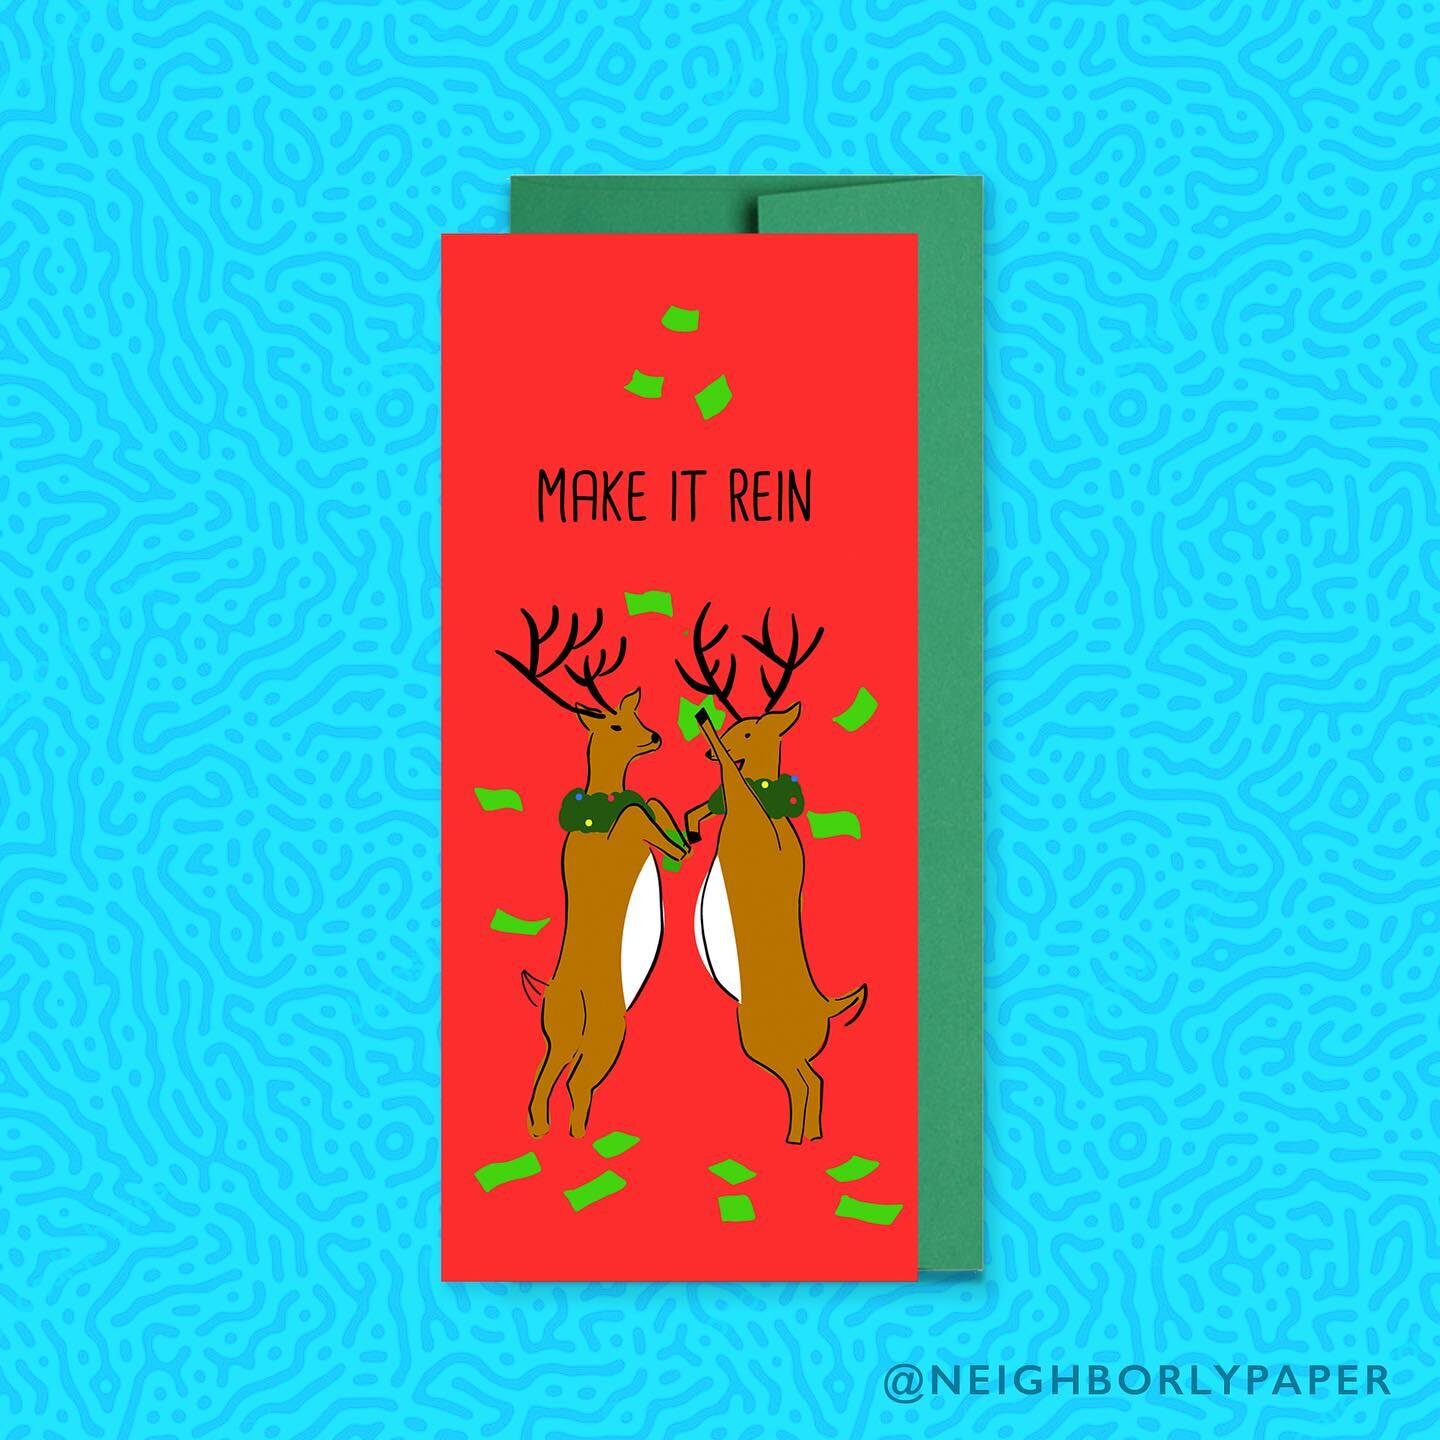 We found a holiday gift everyone loves to receive! #MoneyCard